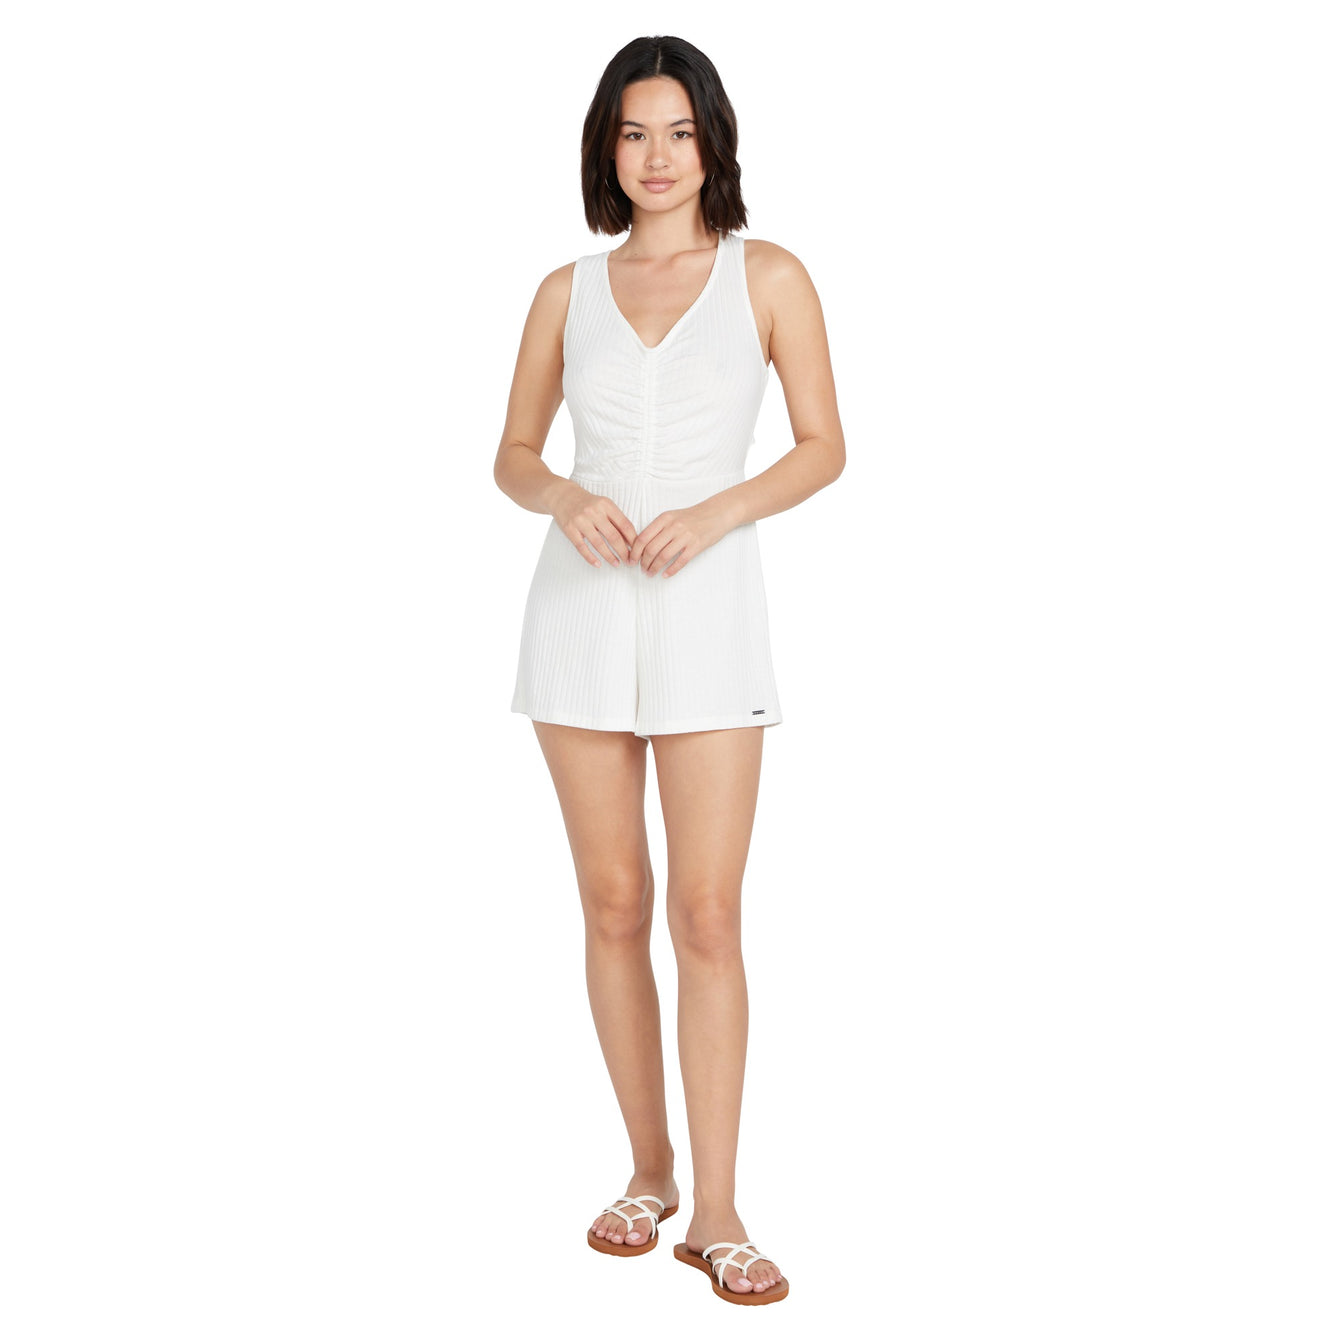 WILD N OUT ROMPER - STAR WHITE